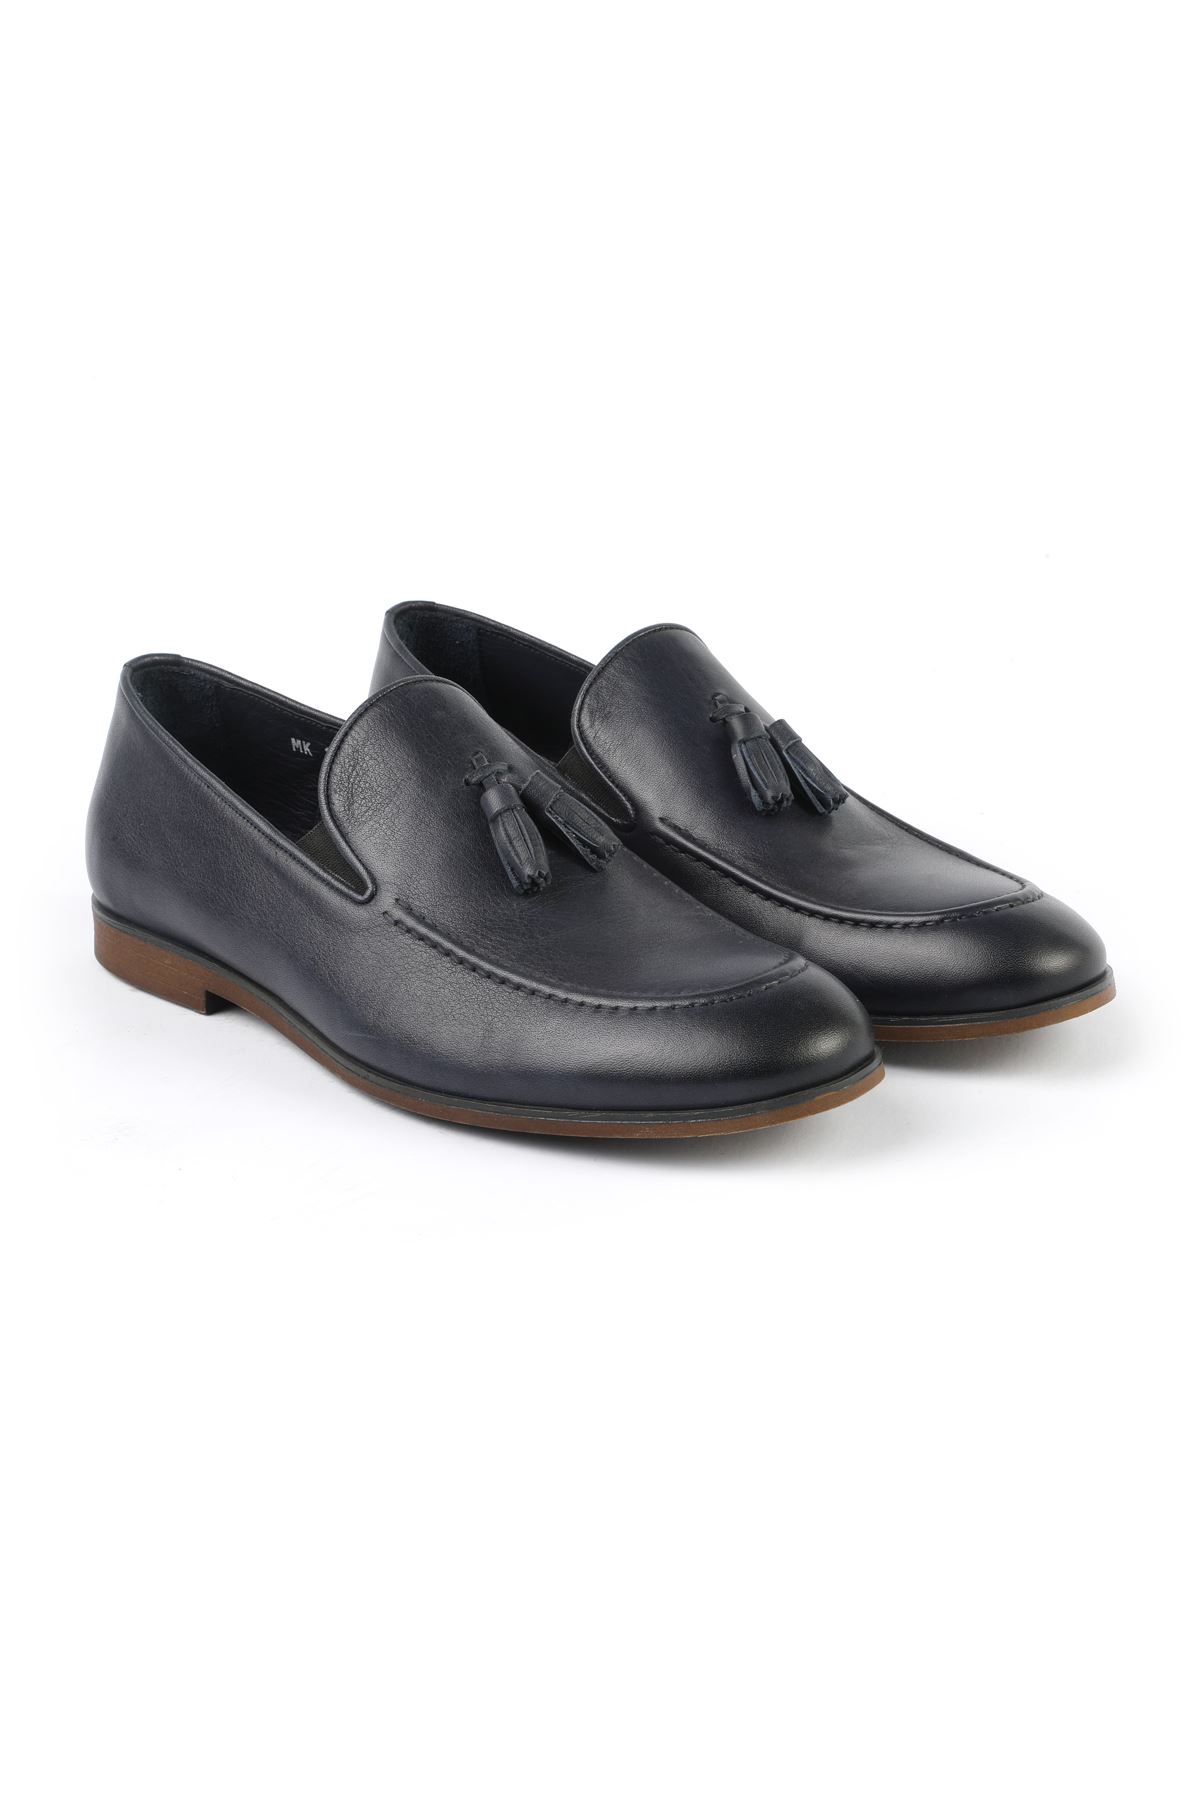 Libero C165 Navy Blue Loafer Shoes